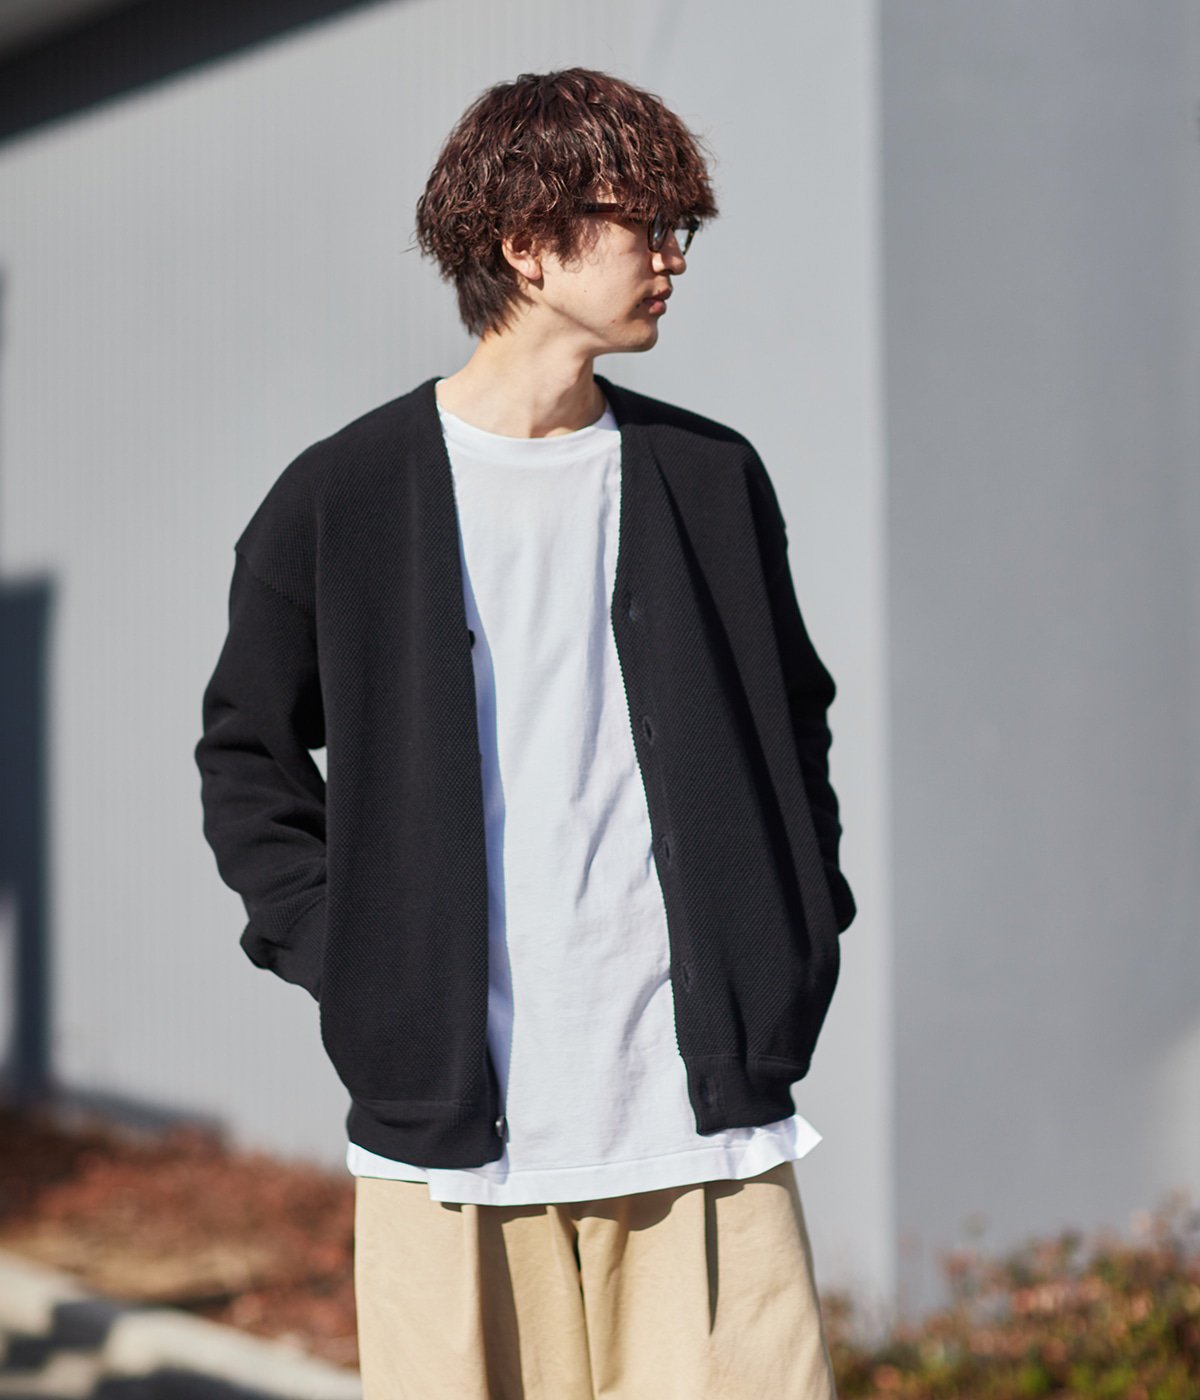 ONLY ARK】別注 Moss stitch V/N cardigan crepuscule(クレプスキュール) トップス カーディガン  (メンズ)の通販 ARKnets(アークネッツ) 公式通販 【正規取扱店】